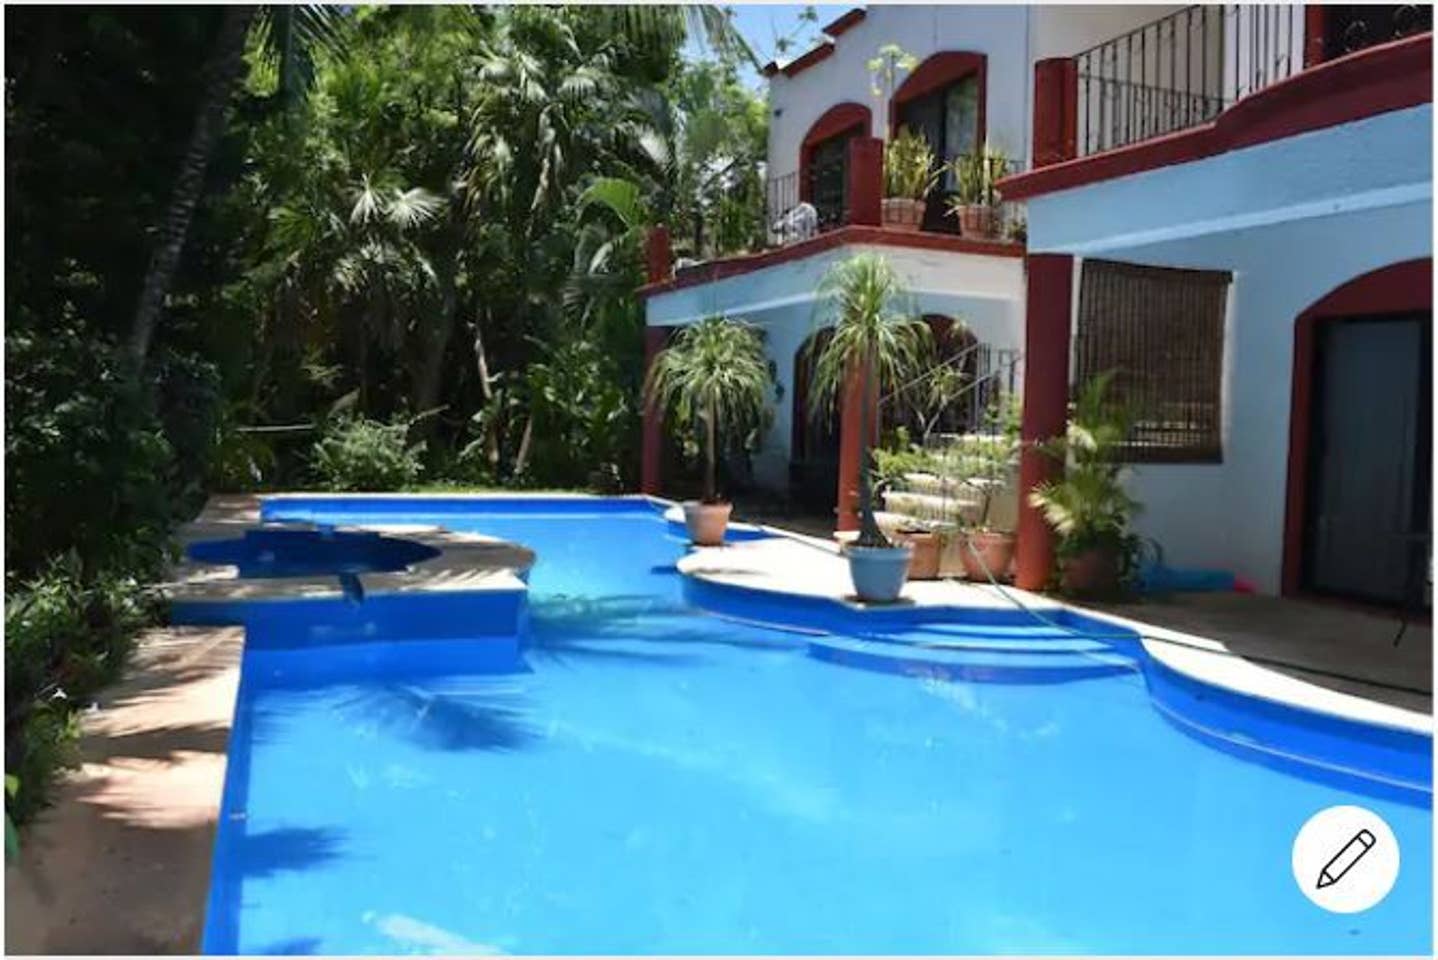 Property Image 2 - Condo for 6 by the Golf Course in Playacar. Best!!